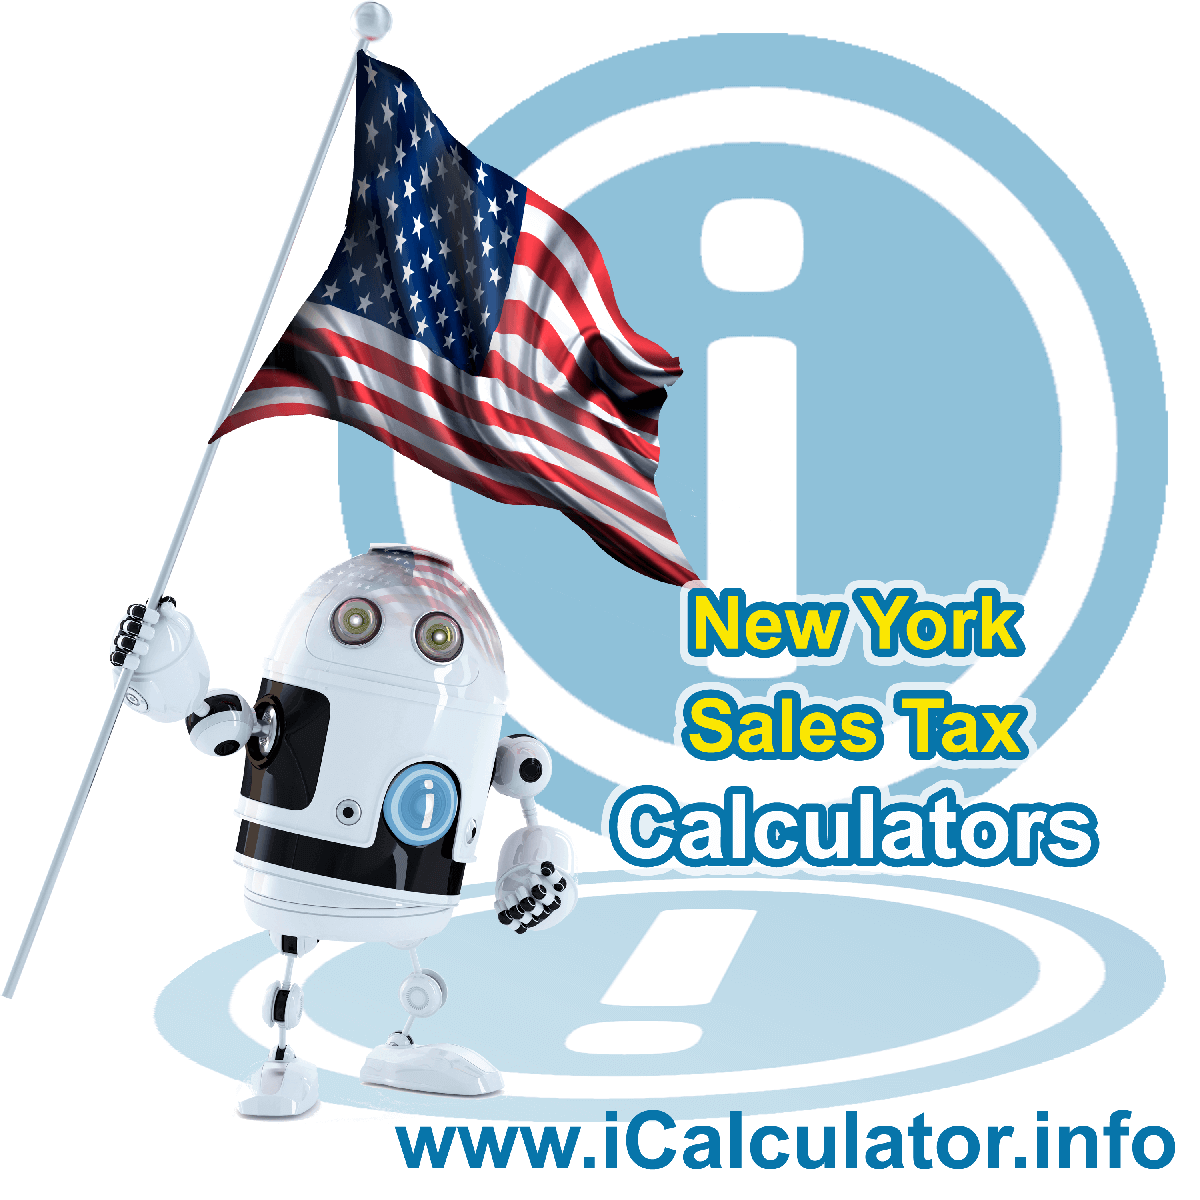 New York City Sales Rates: This image illustrates a calculator robot calculating New York City sales tax manually using the New York City Sales Tax Formula. You can use this information to calculate New York City Sales Tax manually or use the New York City Sales Tax Calculator to calculate sales tax online.